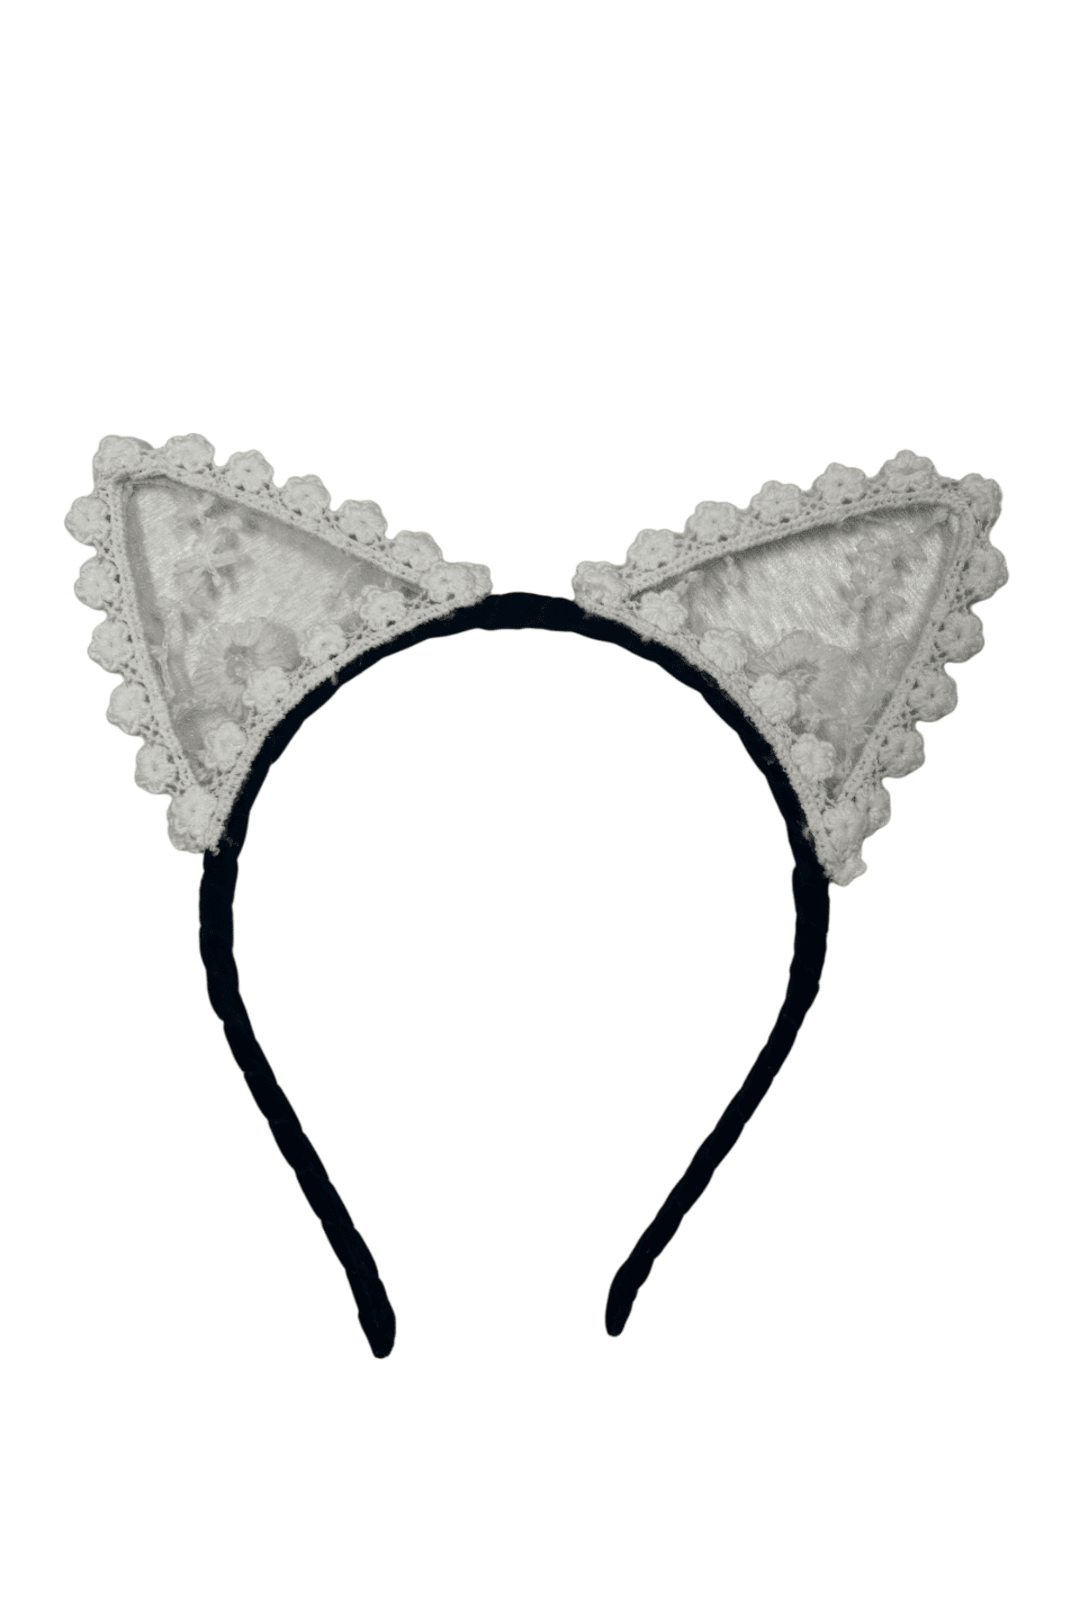 White Lace Cat Ears